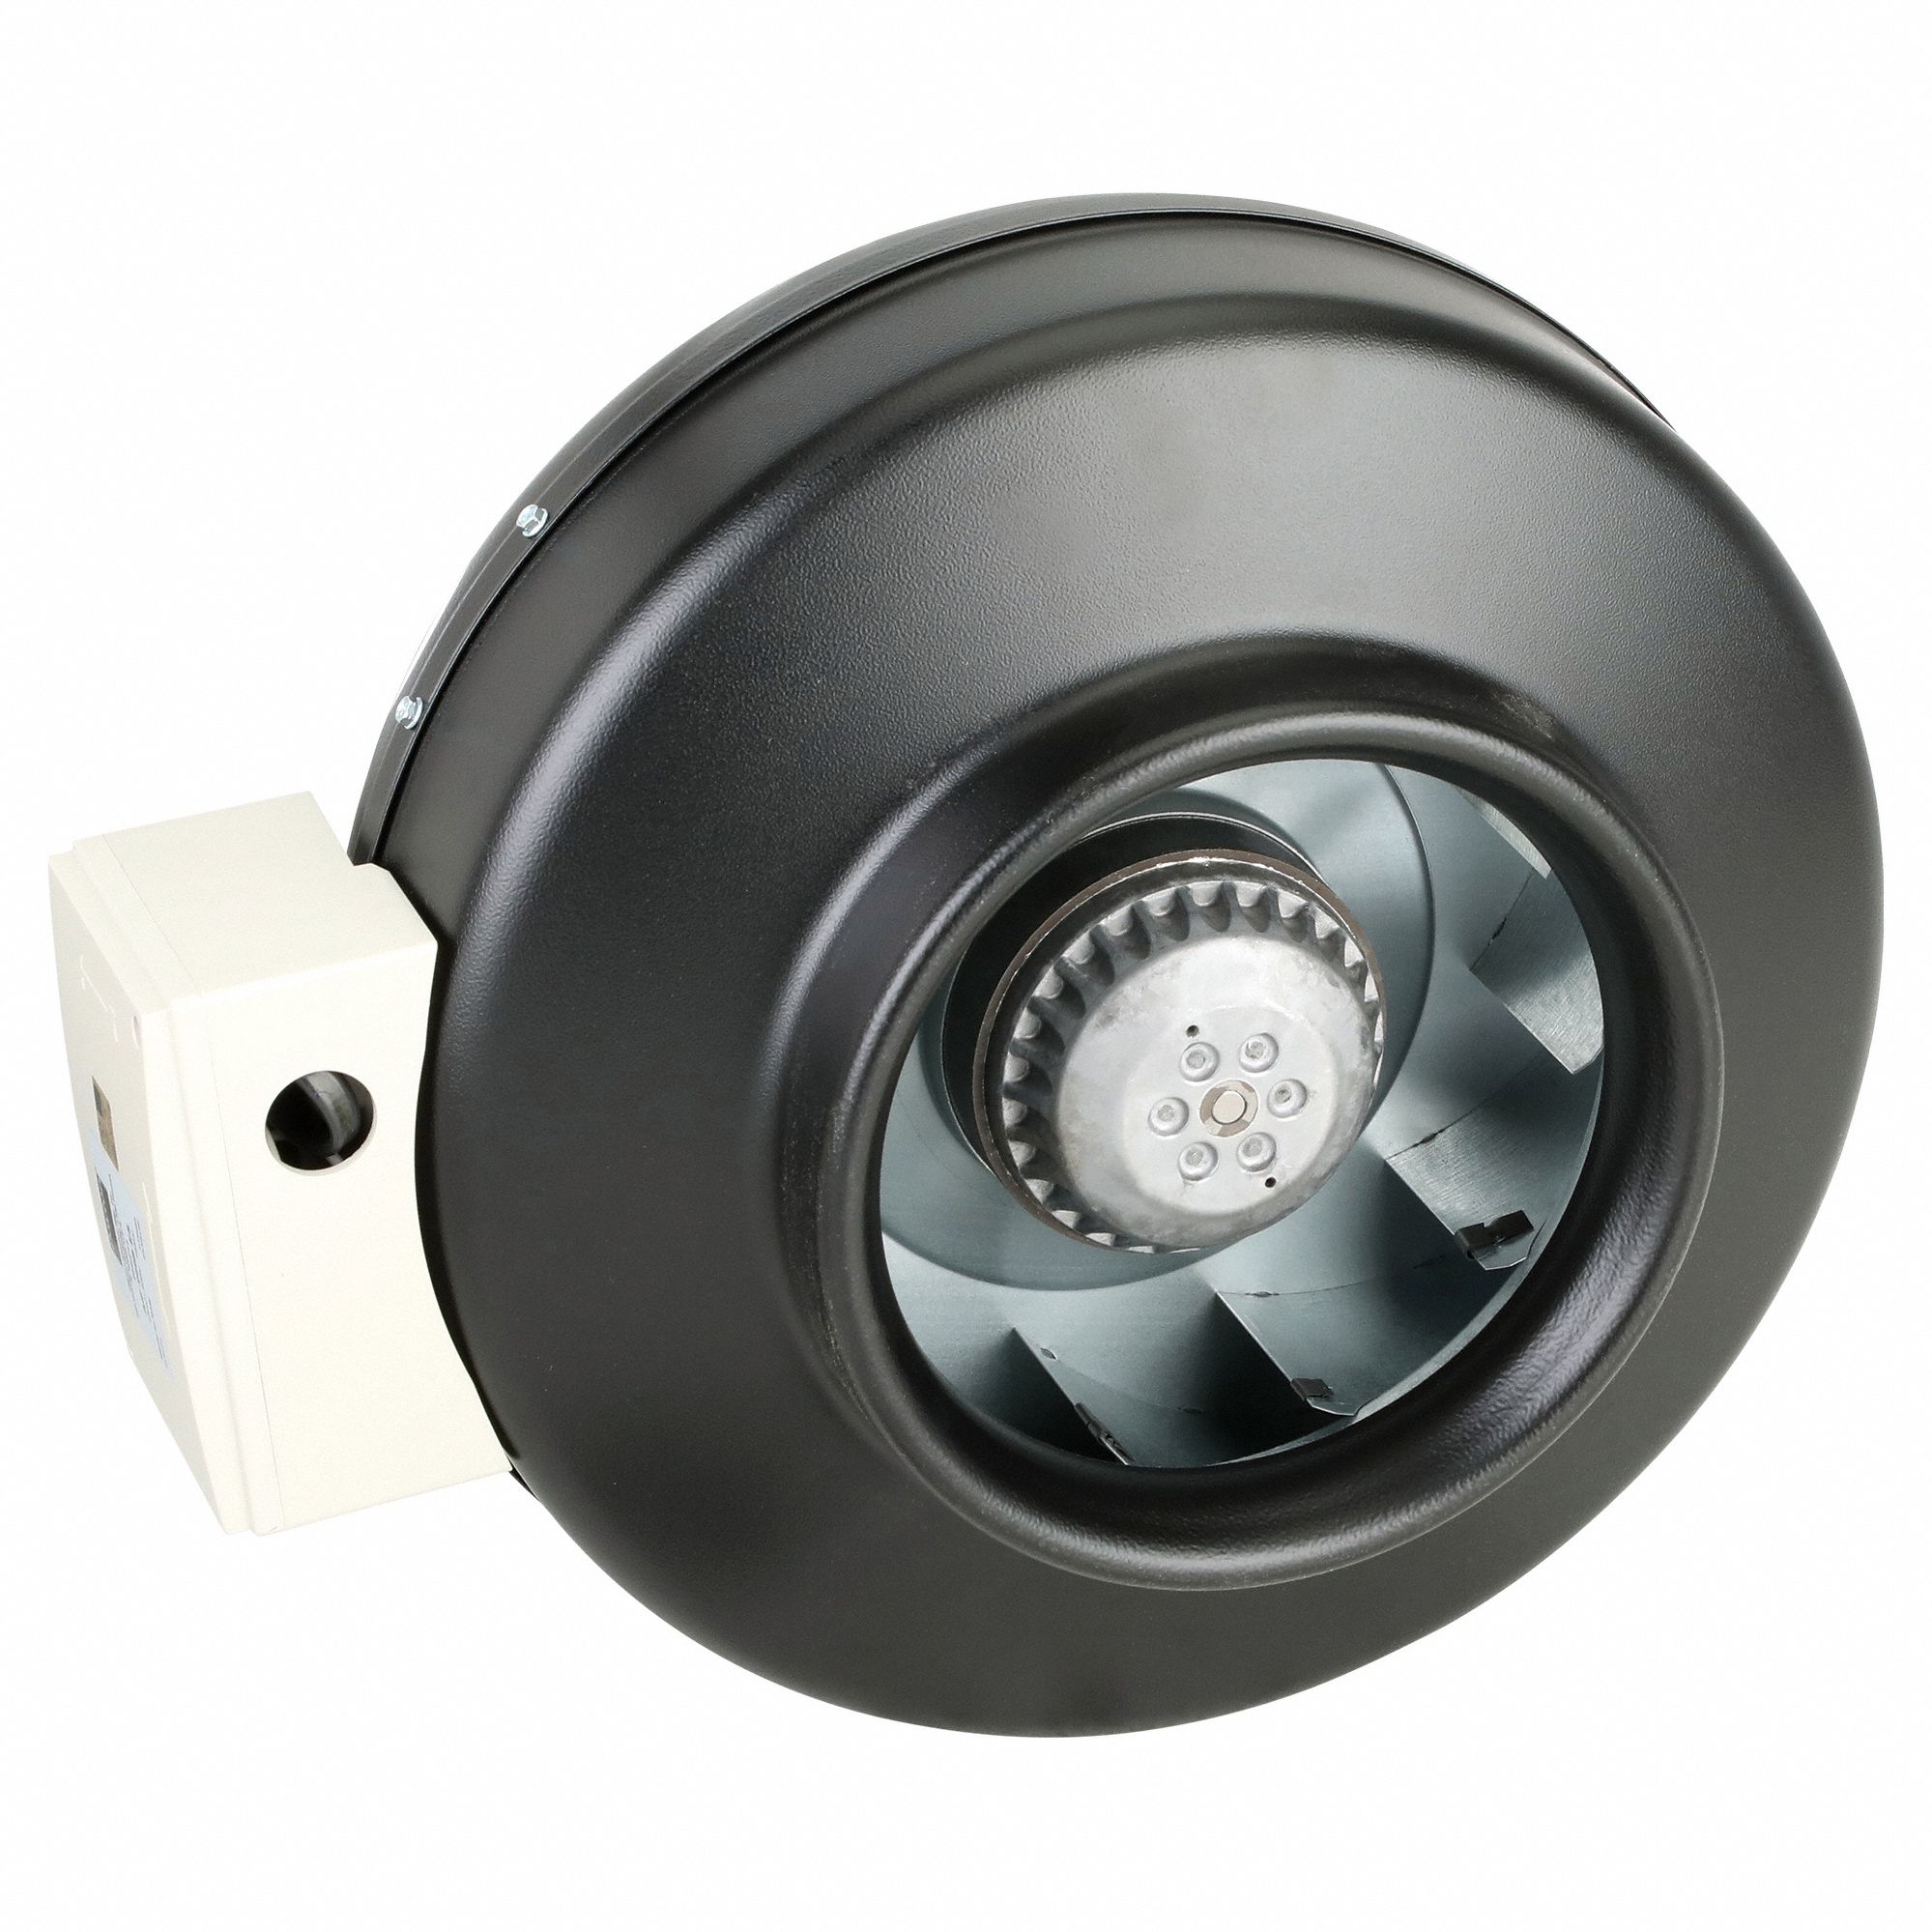 In-Line Duct Fan: 571 cfm Max., 8 in Duct, 111.9 W, 120V AC, 1 Ph, IP54,  Steel, 500 to 749 cfm